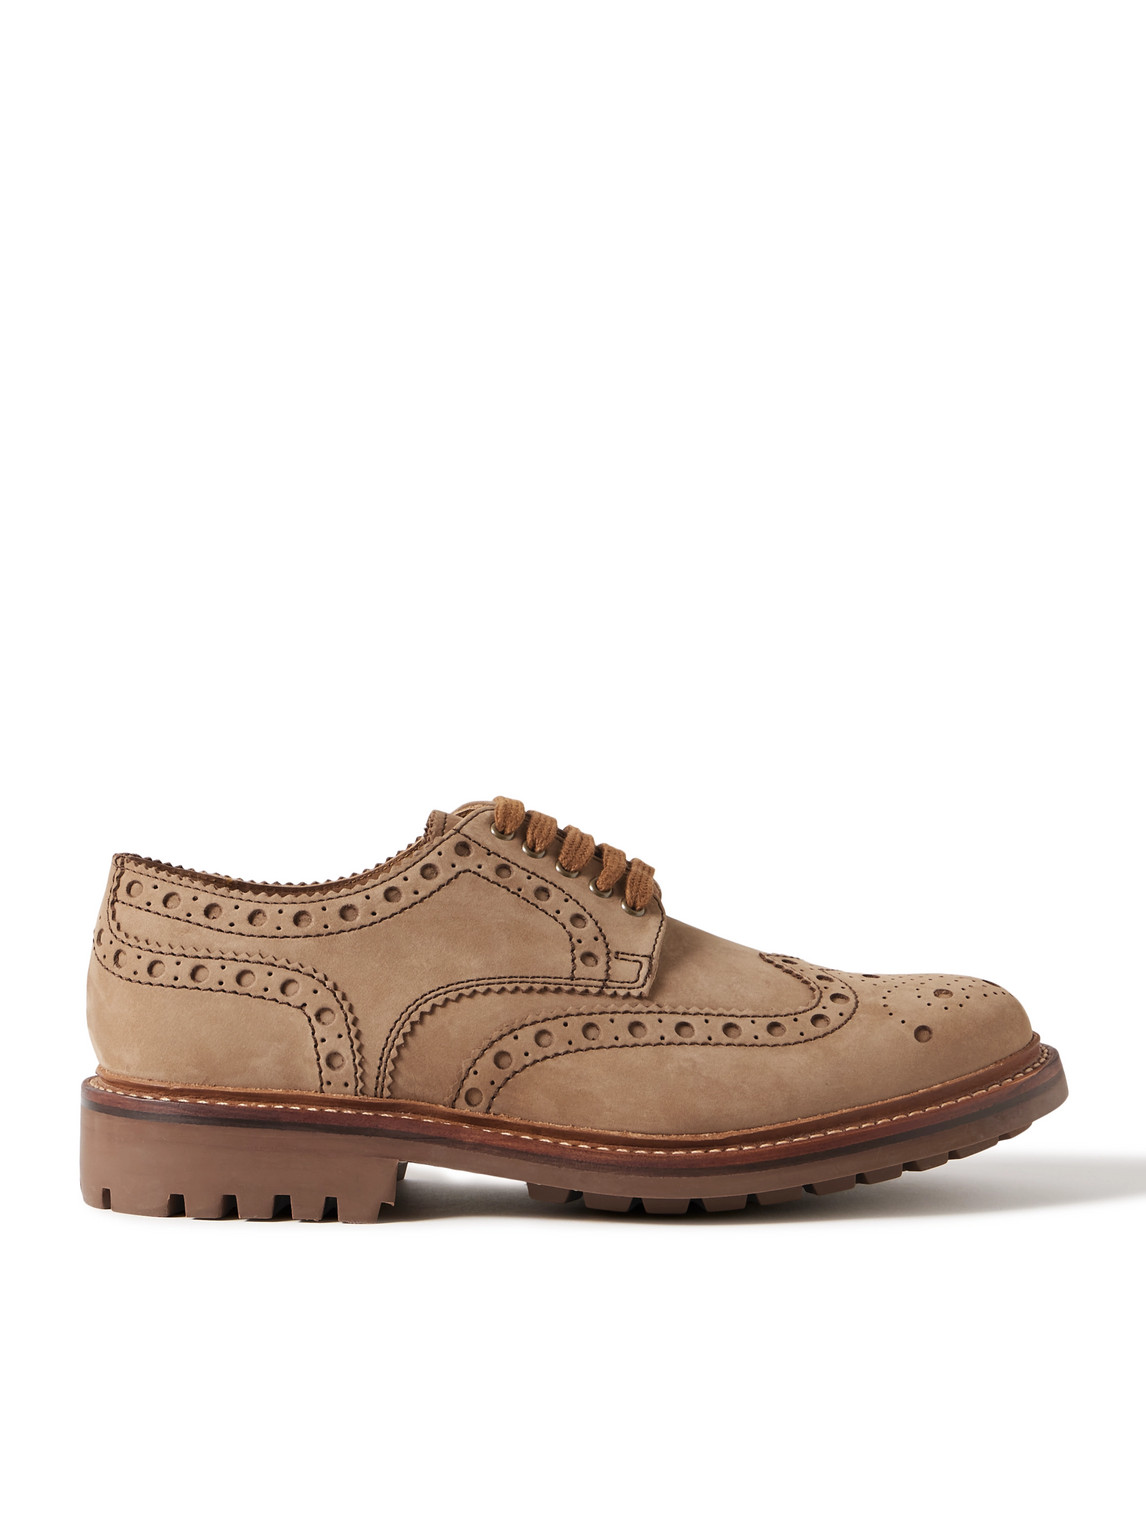 Grenson Archie Nubuck Brogues In Unknown